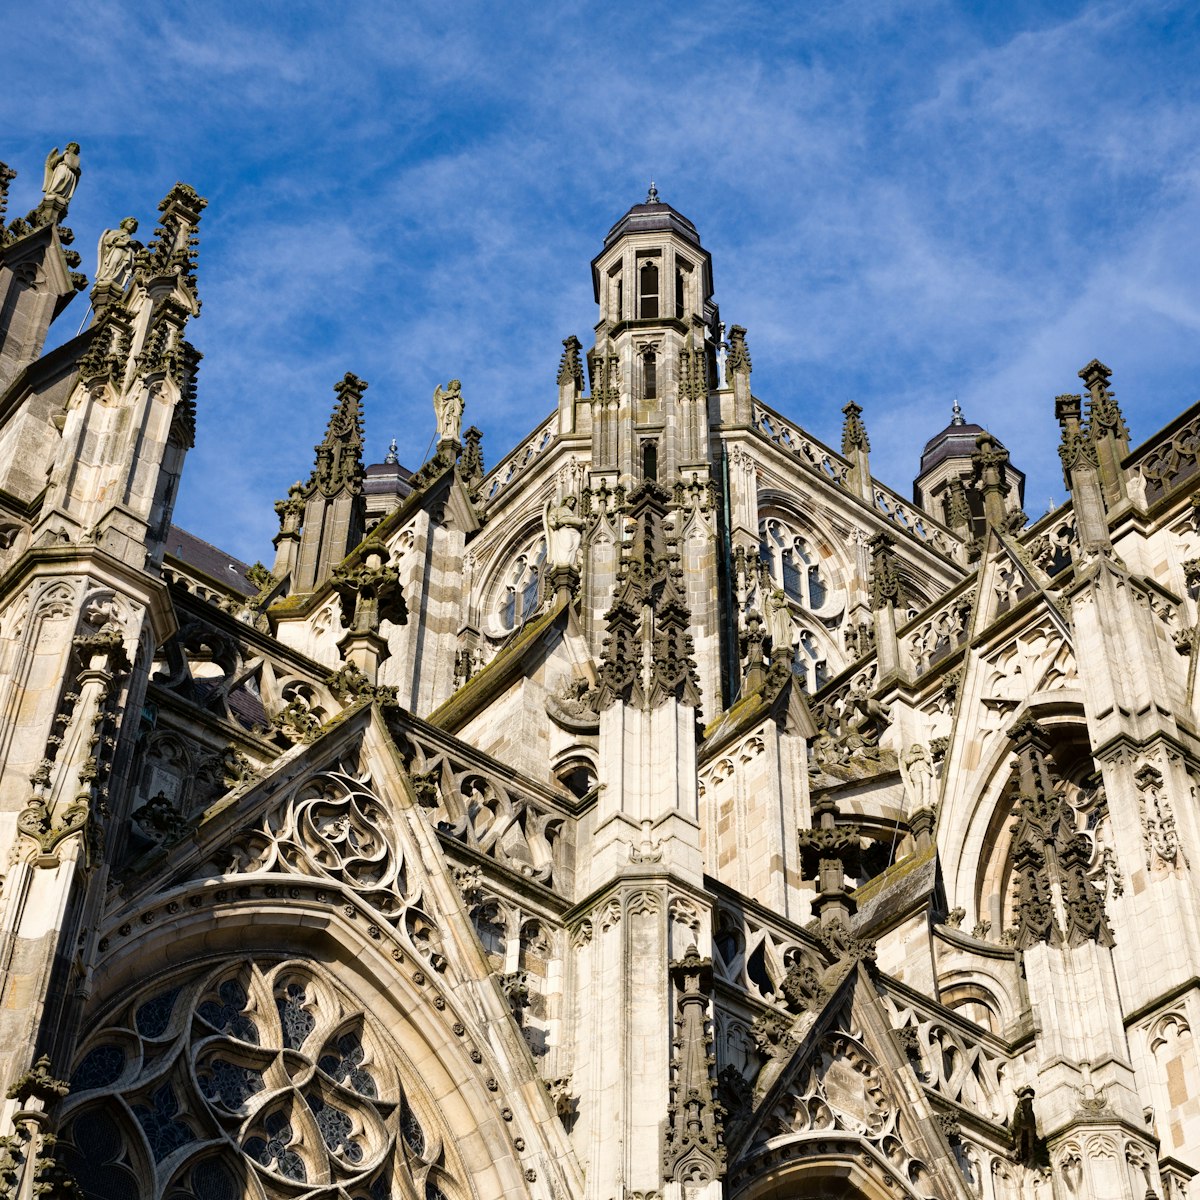 Exterior with many gothic details against a deep blue sky of the gothic medieval cathedral of Saint John, one of the top attractions of Den Bosch, 's-Hertogenbosch, Netherlands; Shutterstock ID 180468908; Your name (First / Last): Josh Vogel; Project no. or GL code: 56530; Network activity no. or Cost Centre: Online-Design; Product or Project: 65050/7529/Josh Vogel/LP.com Destination Galleries